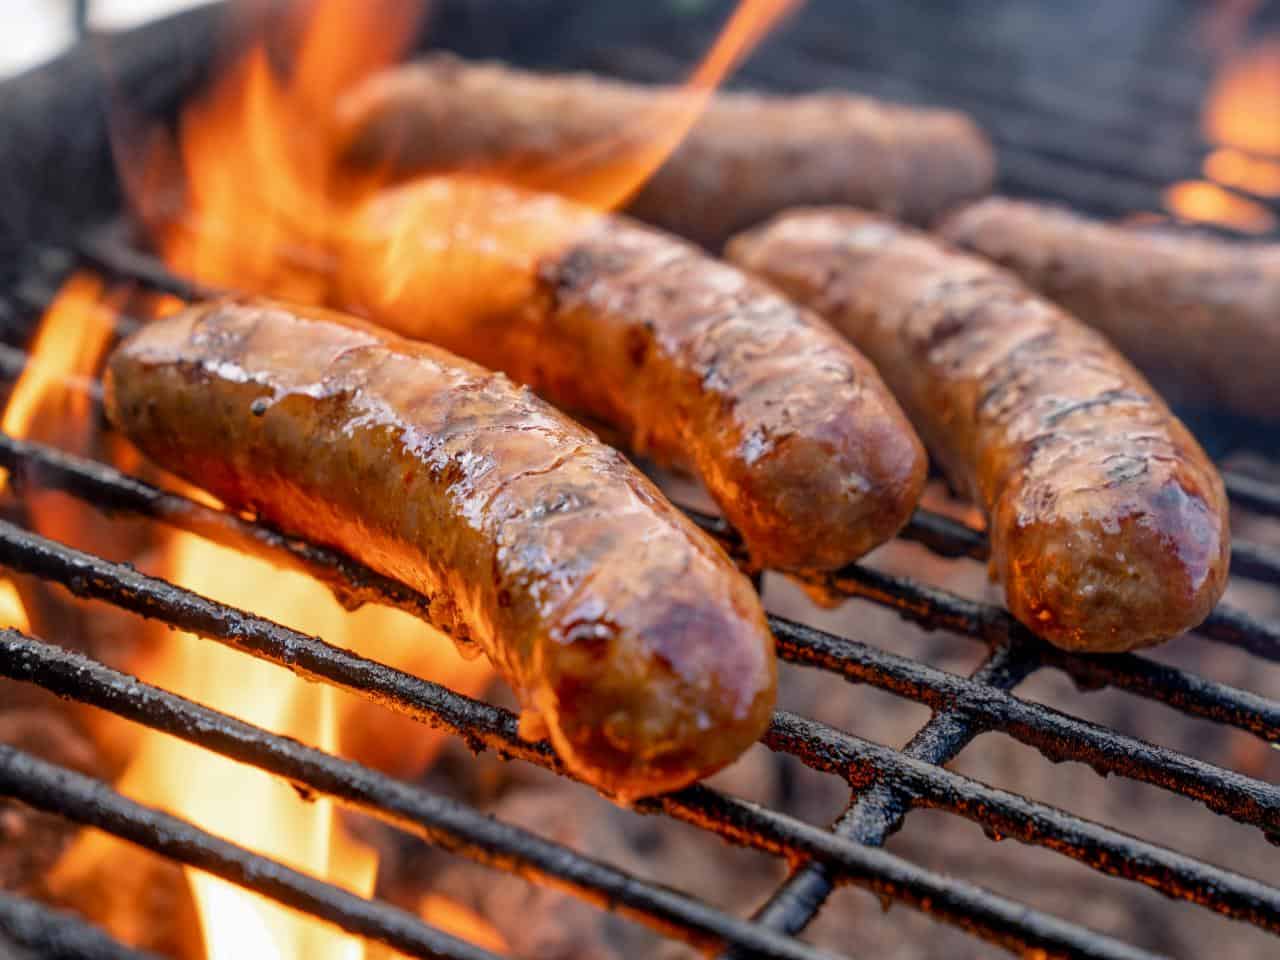 How to BBQ or grill a sausage perfectly.